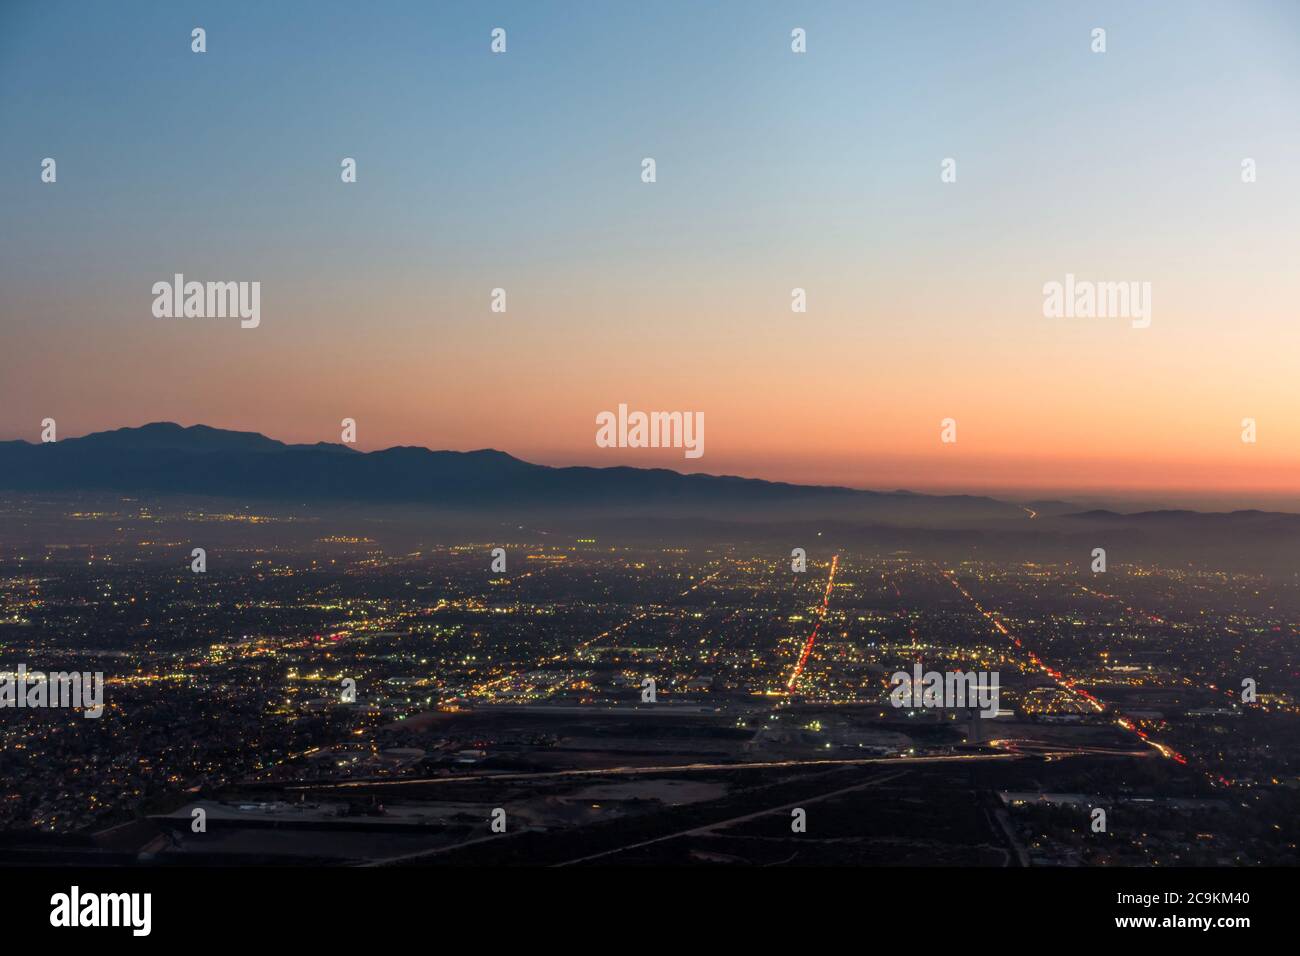 The city lights of the skyline of the Inland Empire near Los Angeles California begin to appear as the sun sets in a dramatic orange sunset. Stock Photo